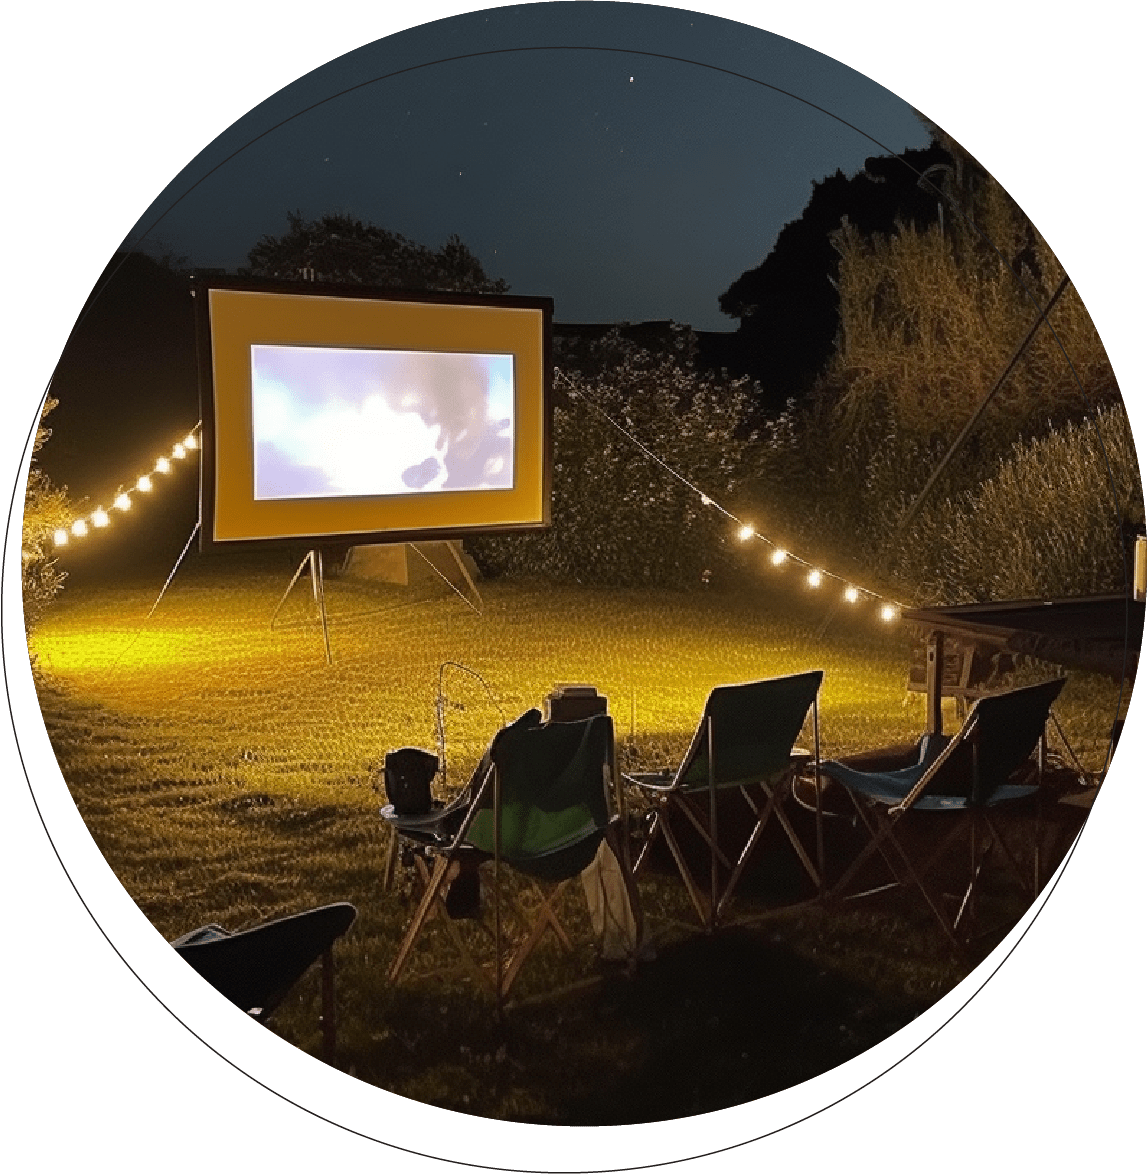 Amphitheatre movie night – OTT Streaming with Projector & screen